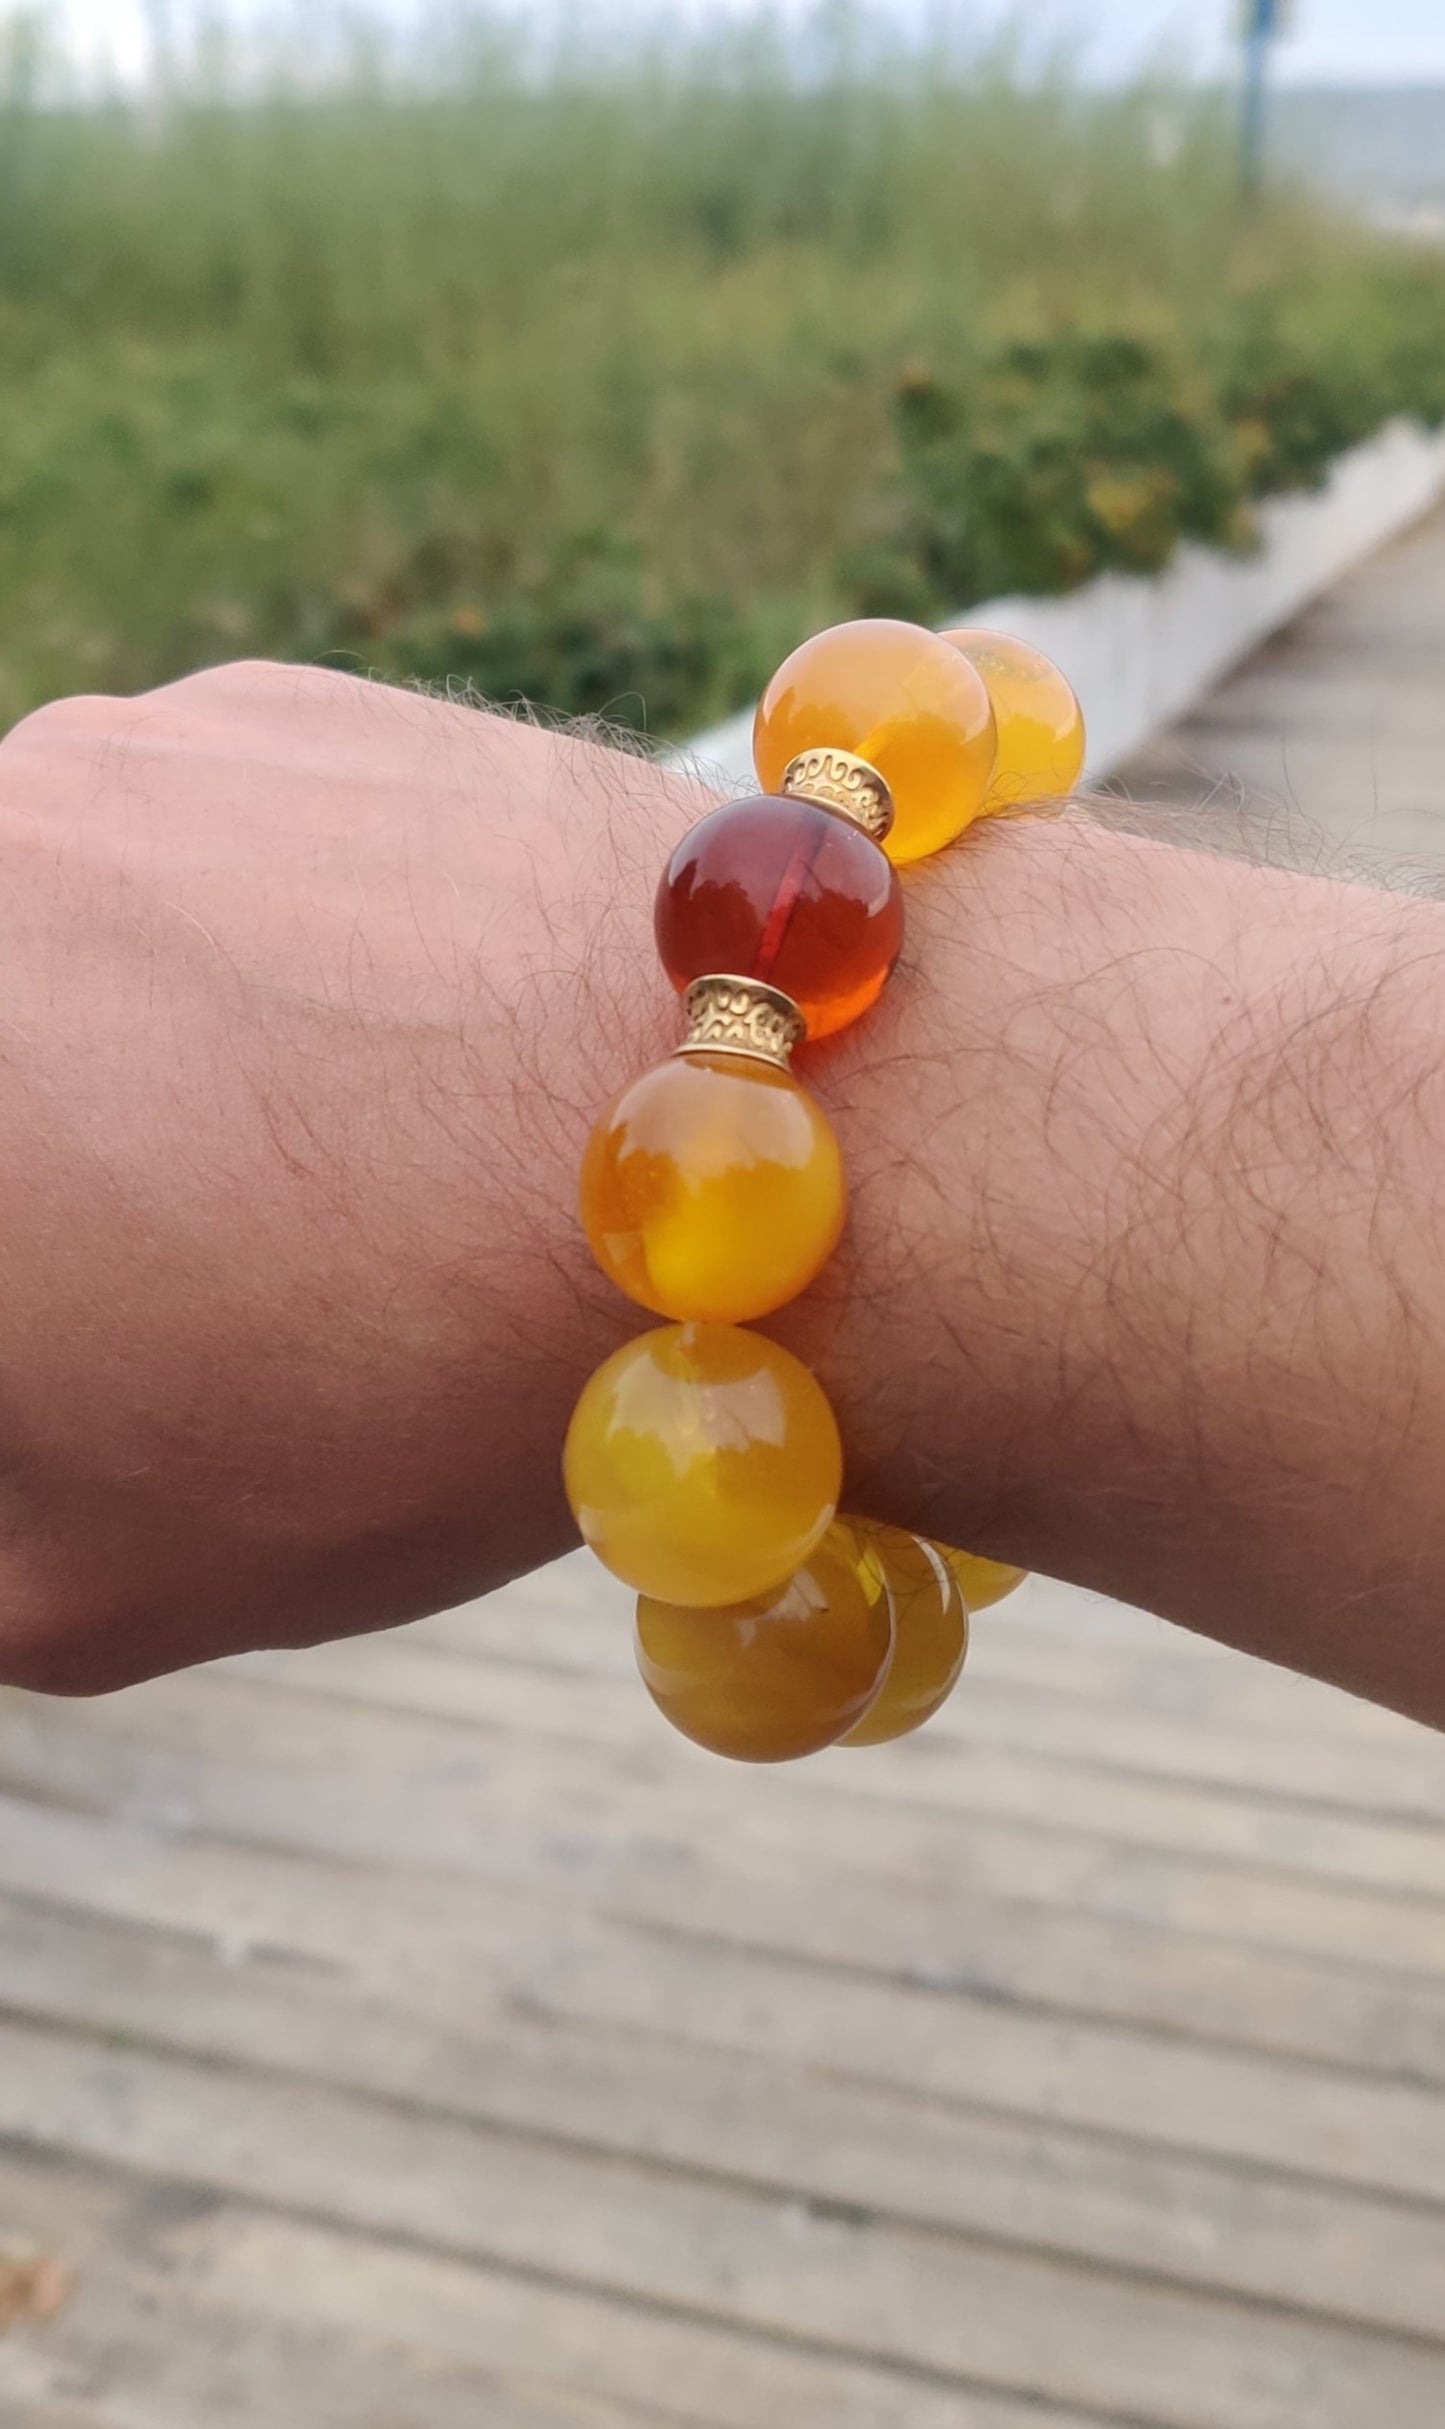 Natural Amber Beaded Bracelet Butterscotch and Cherry 21mm